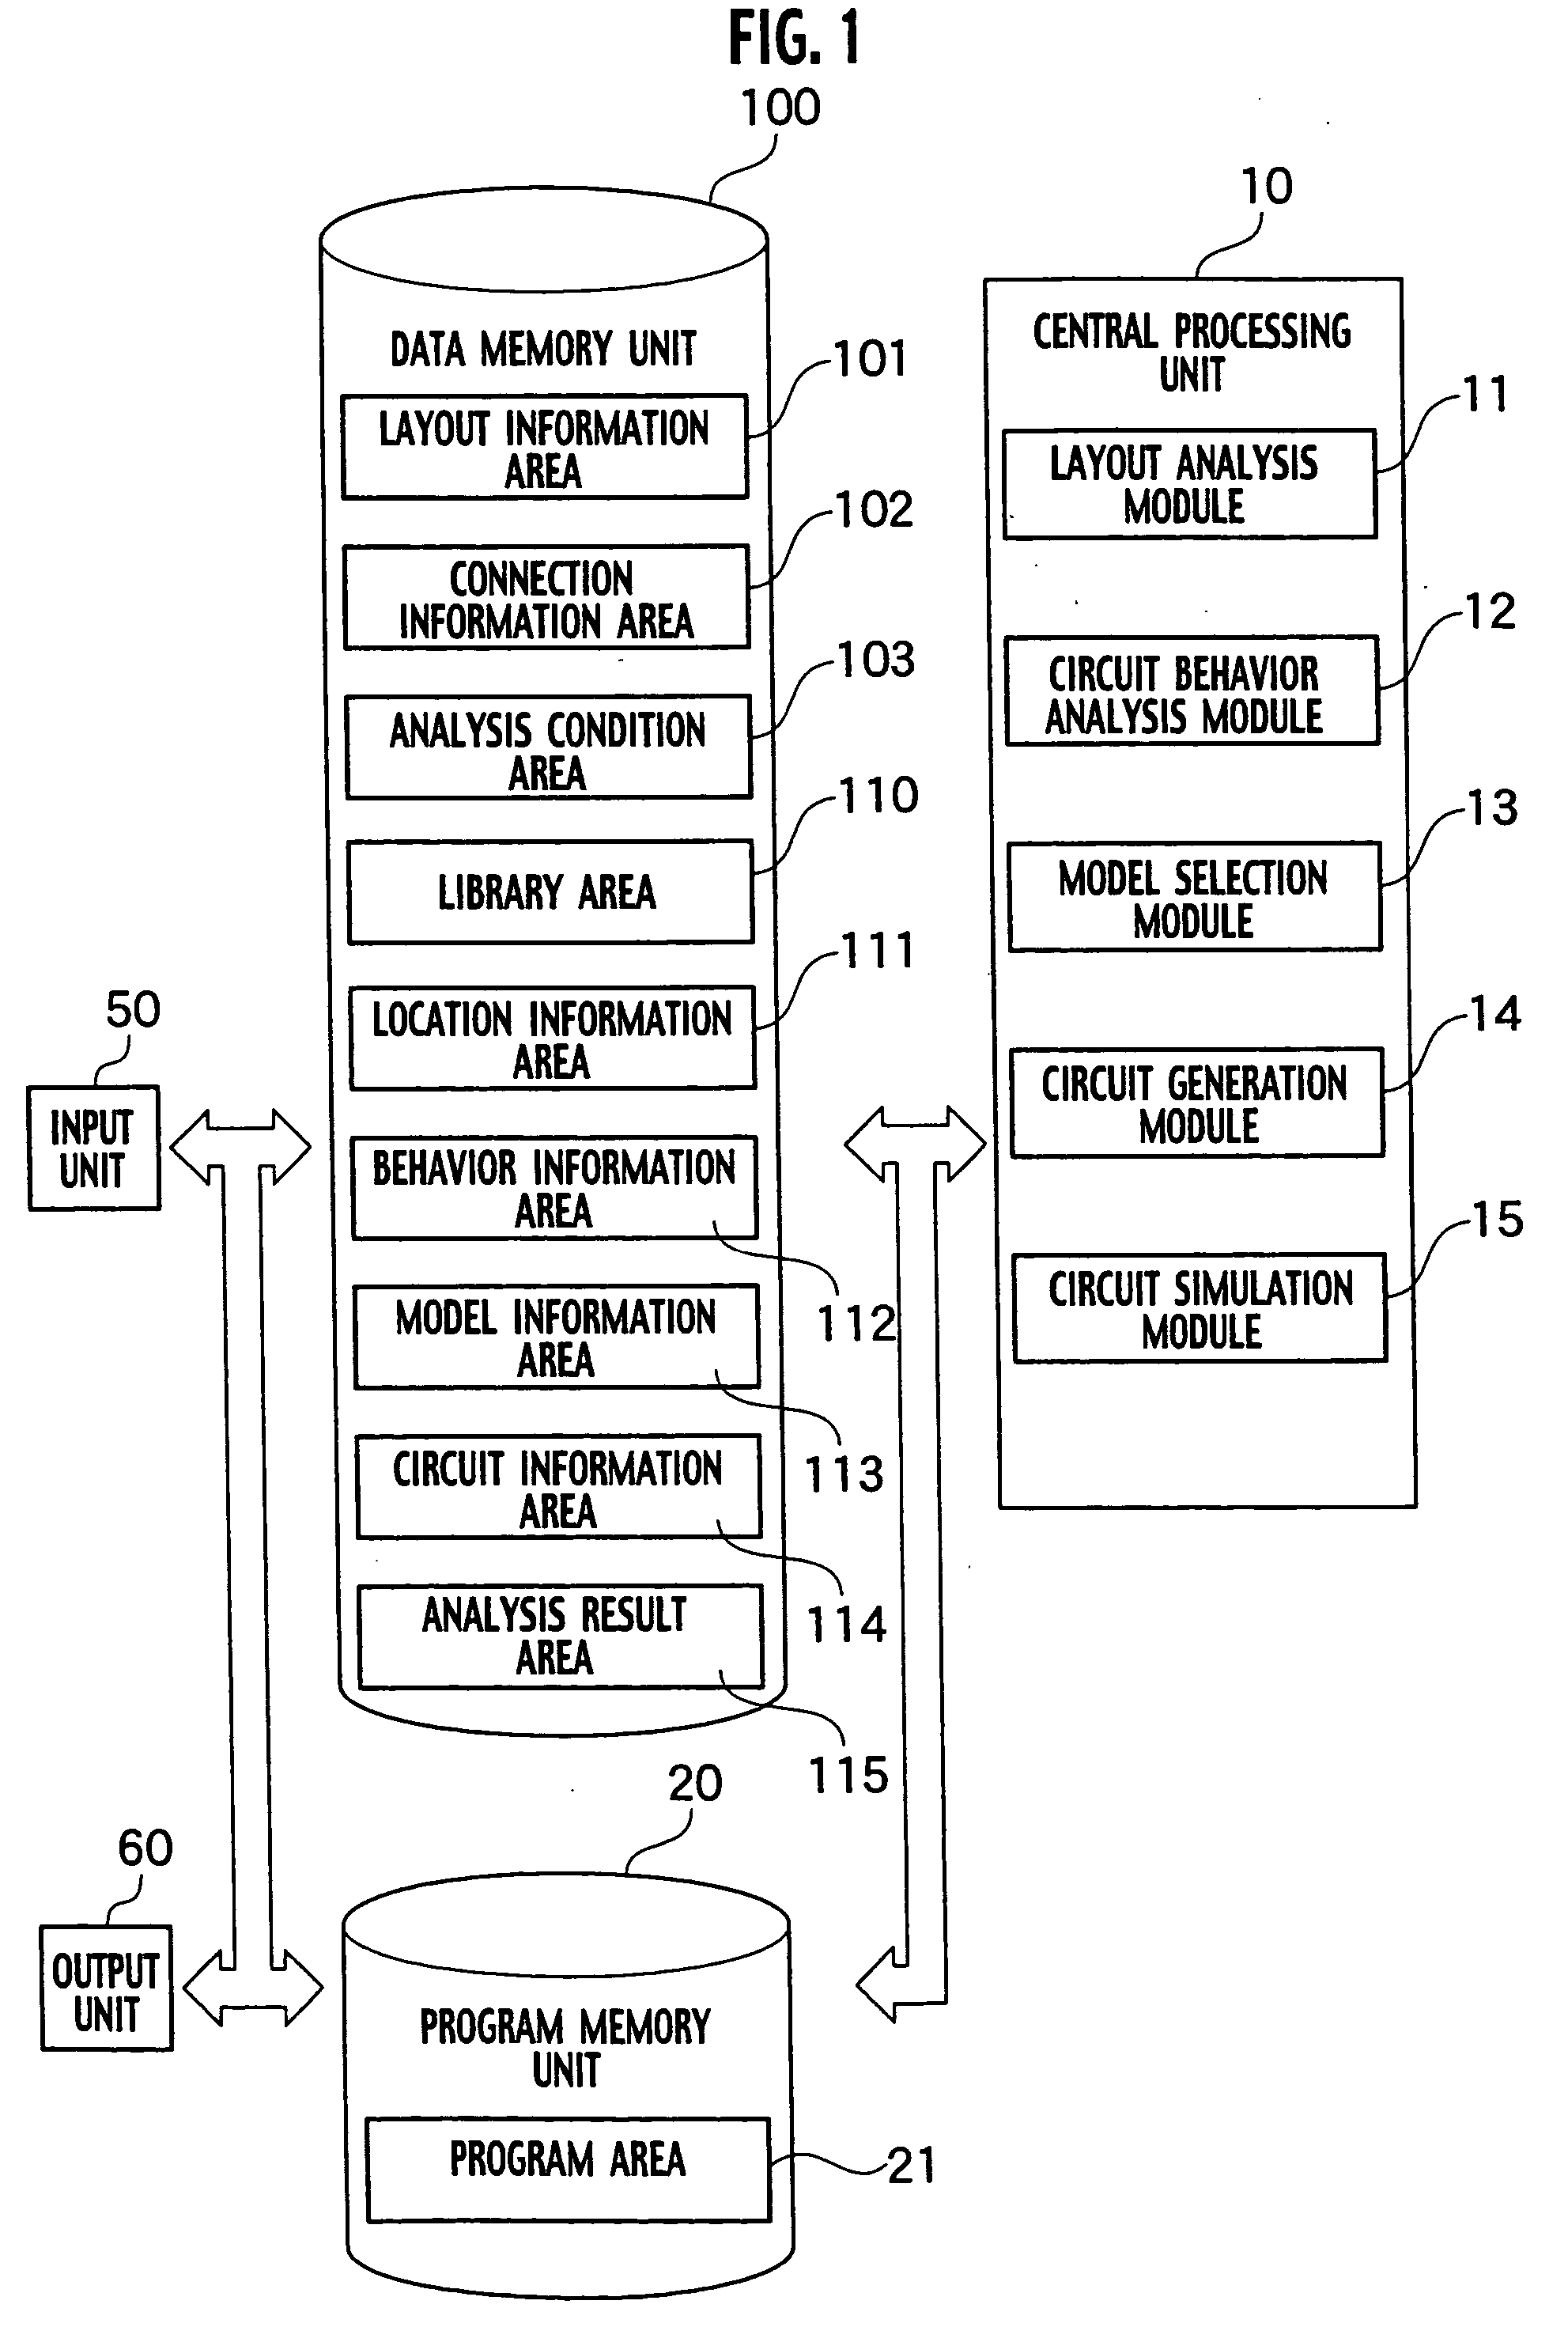 Circuit simulation system with simulation models assigned based on layout information and connection information